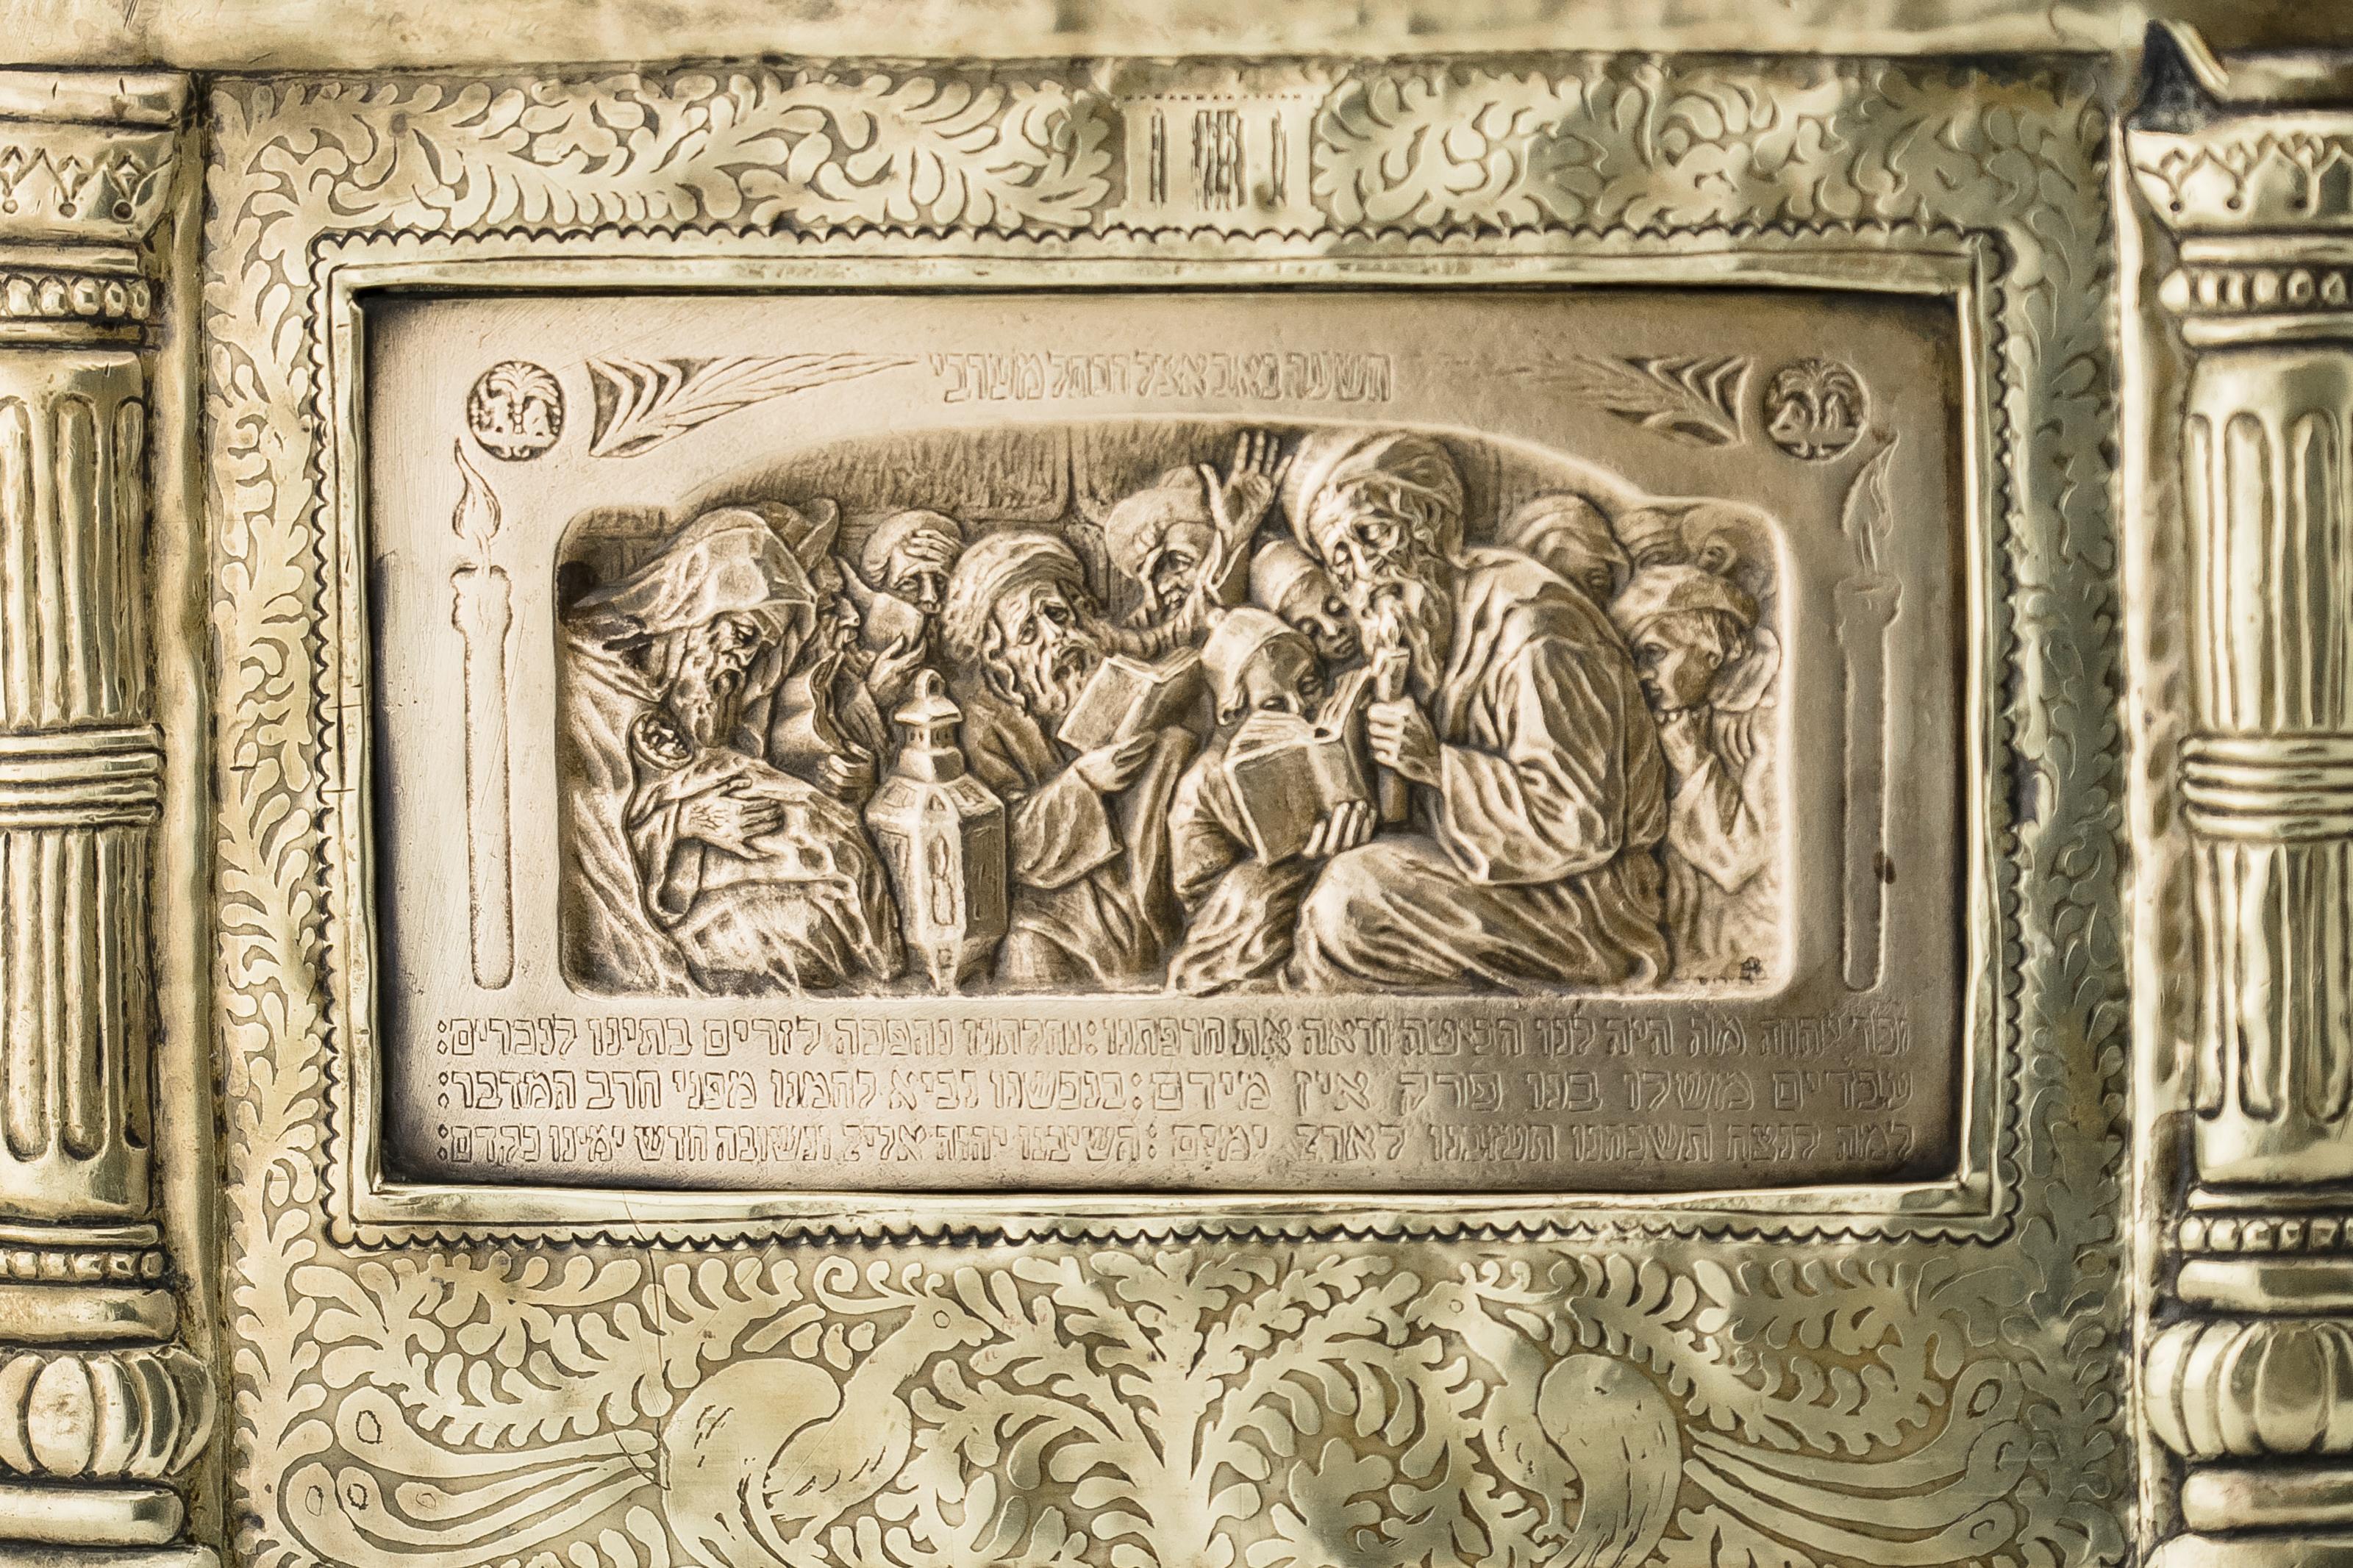 Framed plaque by Boris Schatz, Bezalel School, Jerusalem, circa 1915.
Depicting the scene of Tisha B’Av, Acid etched, hammered, and engraved frame, on top with two lions holding the Temple Menorah and the bottom engraved 